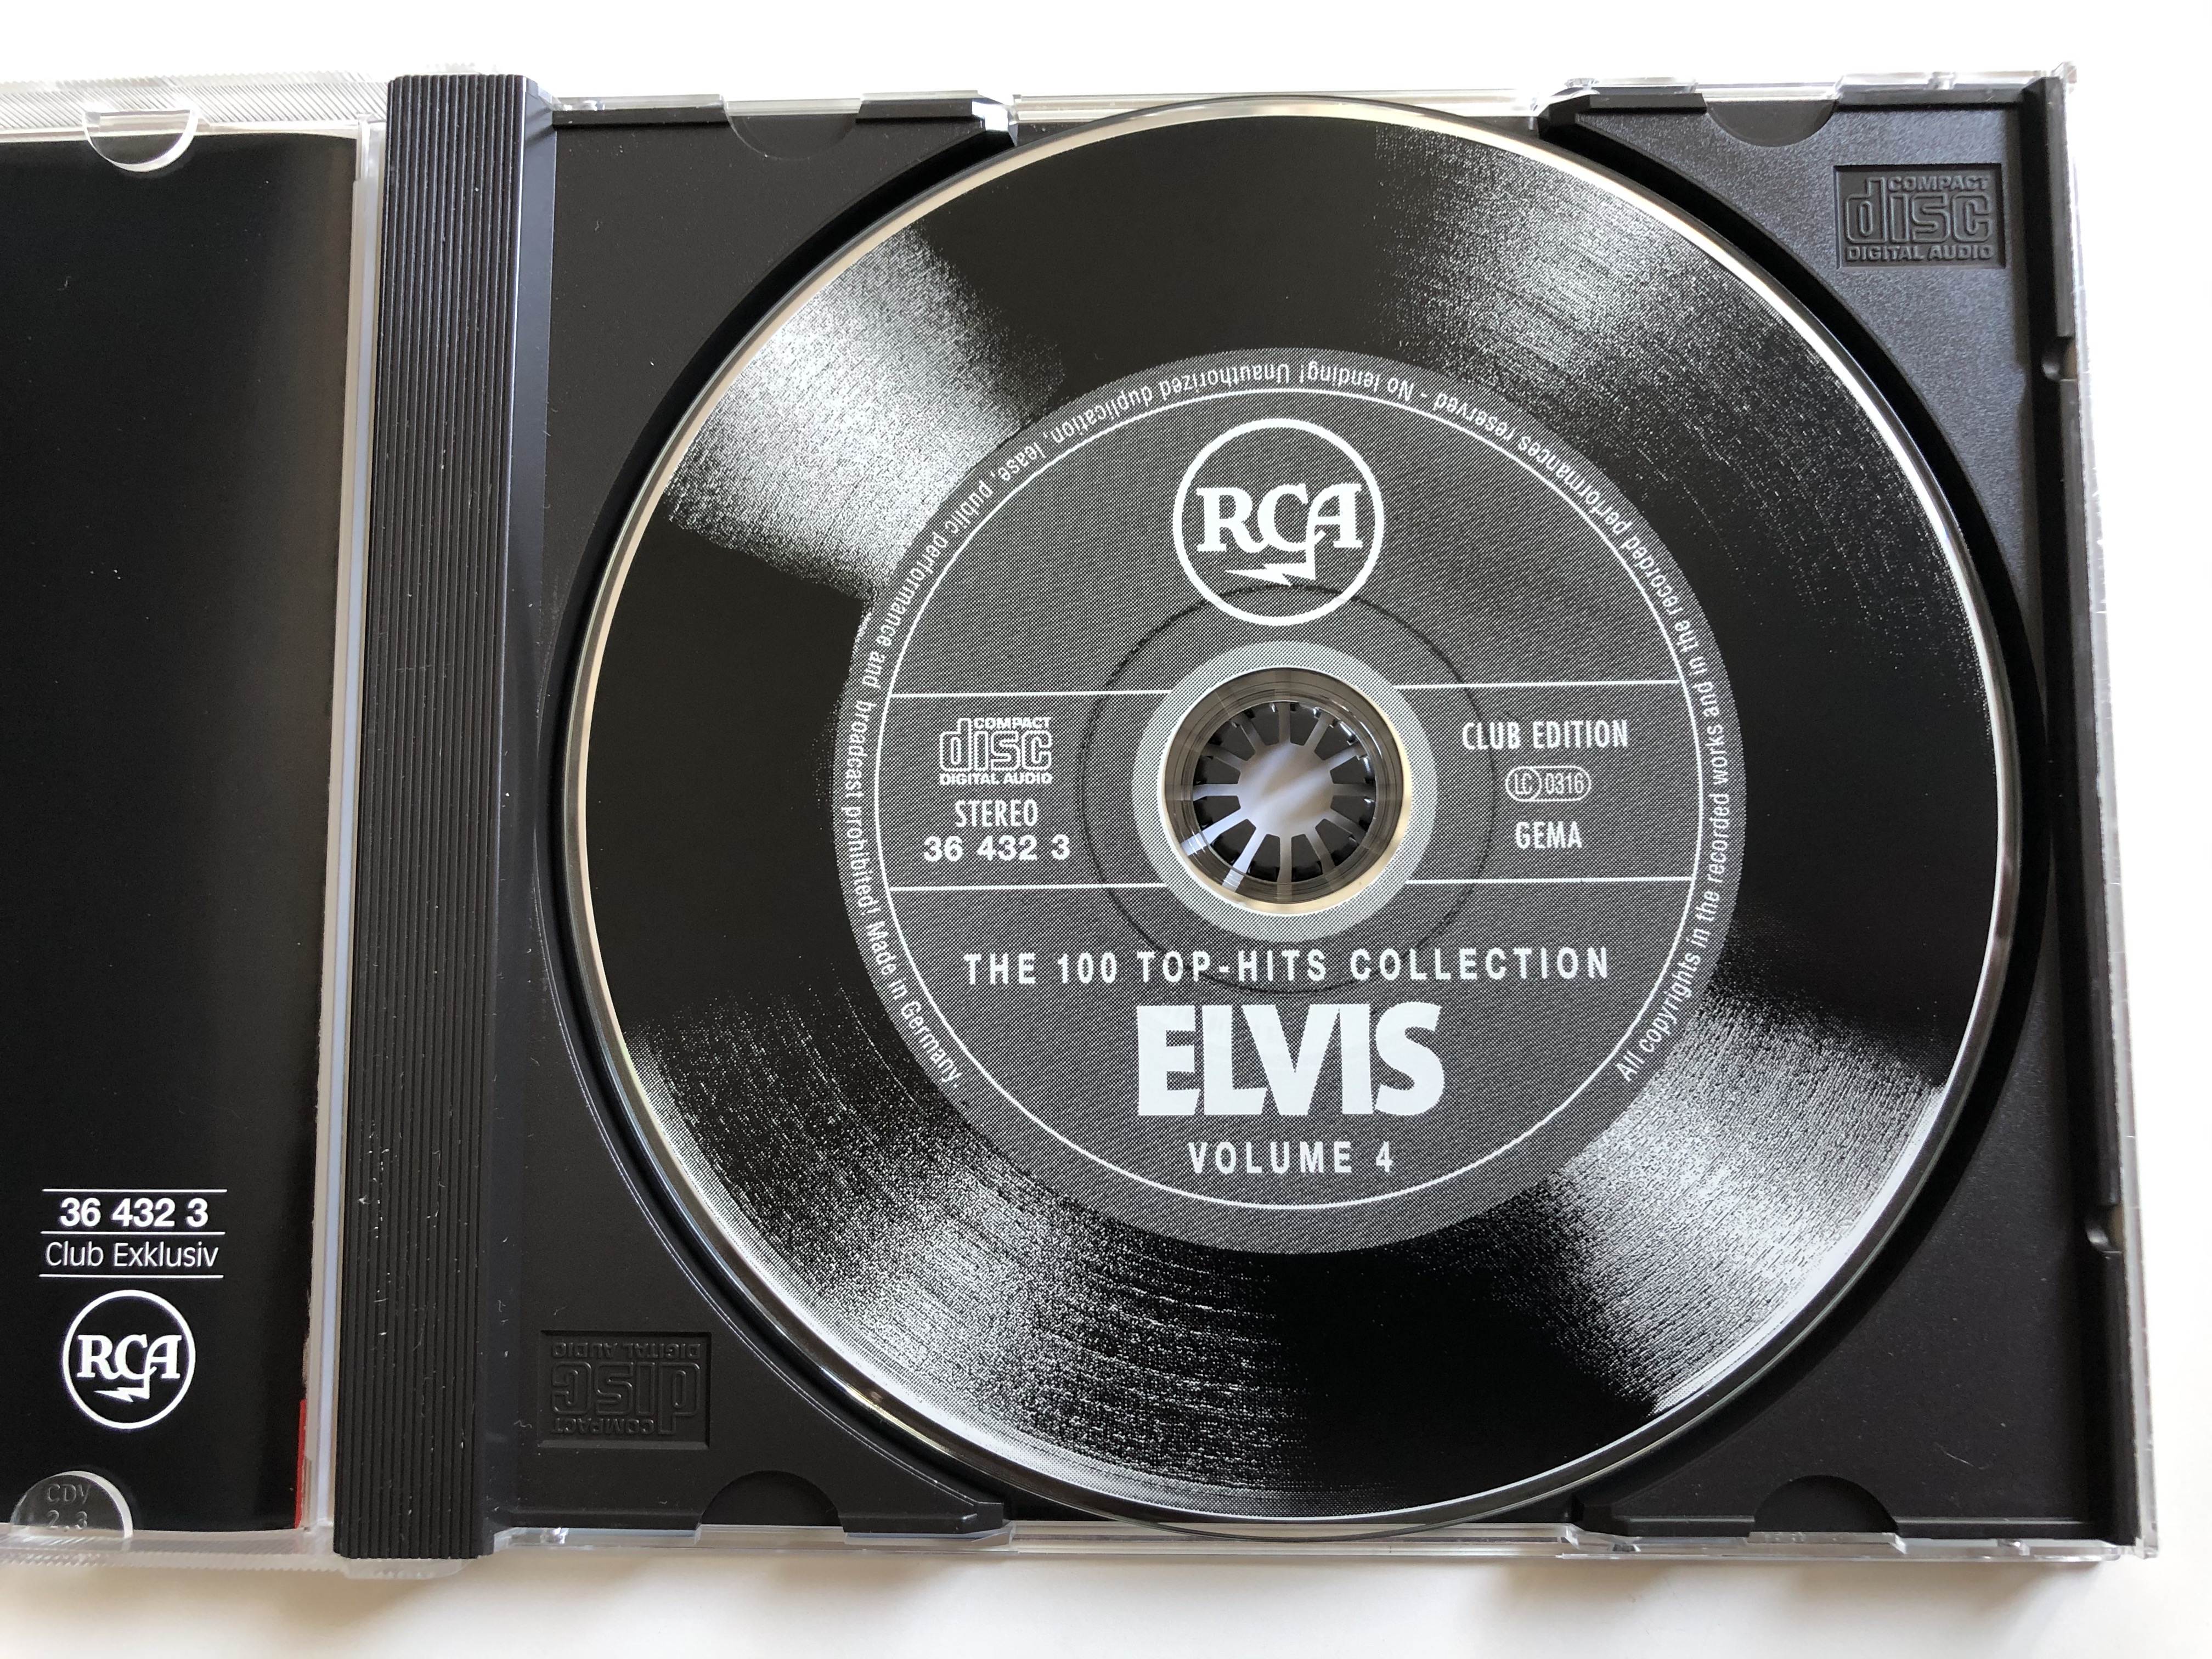 elvis-the-100-top-hits-collection-rca-5x-audio-cd-box-set-1997-stereo-36-428-1-19-.jpg